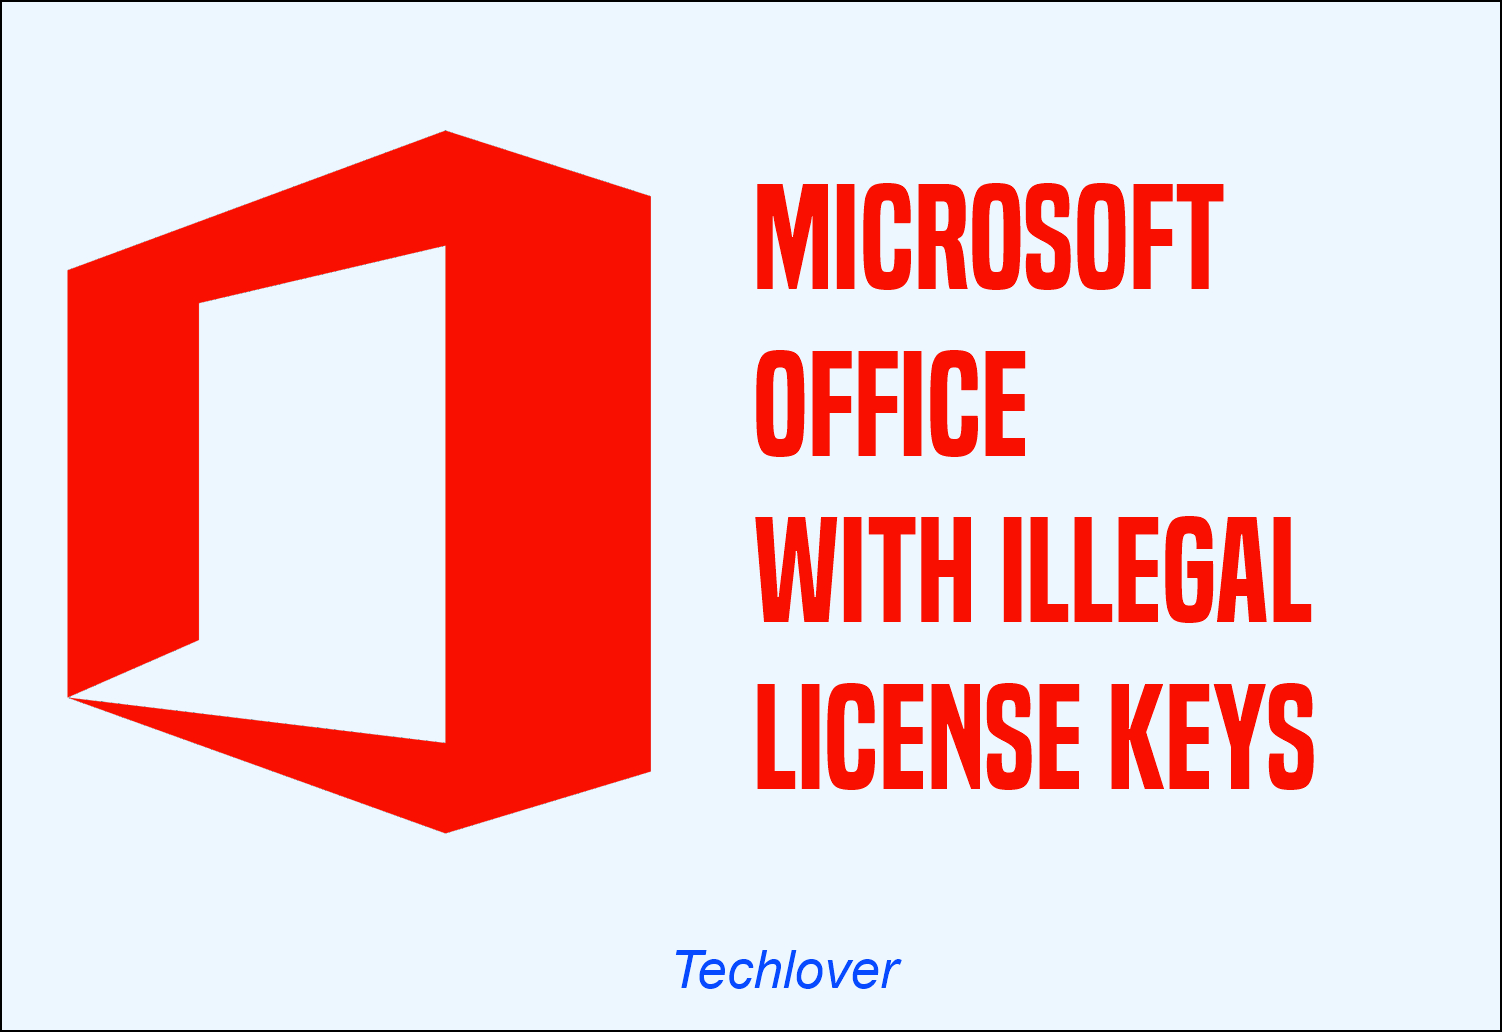 MICROSOFT-OFFICE-WITH-ILLEGAL-LICENSE-KEYS